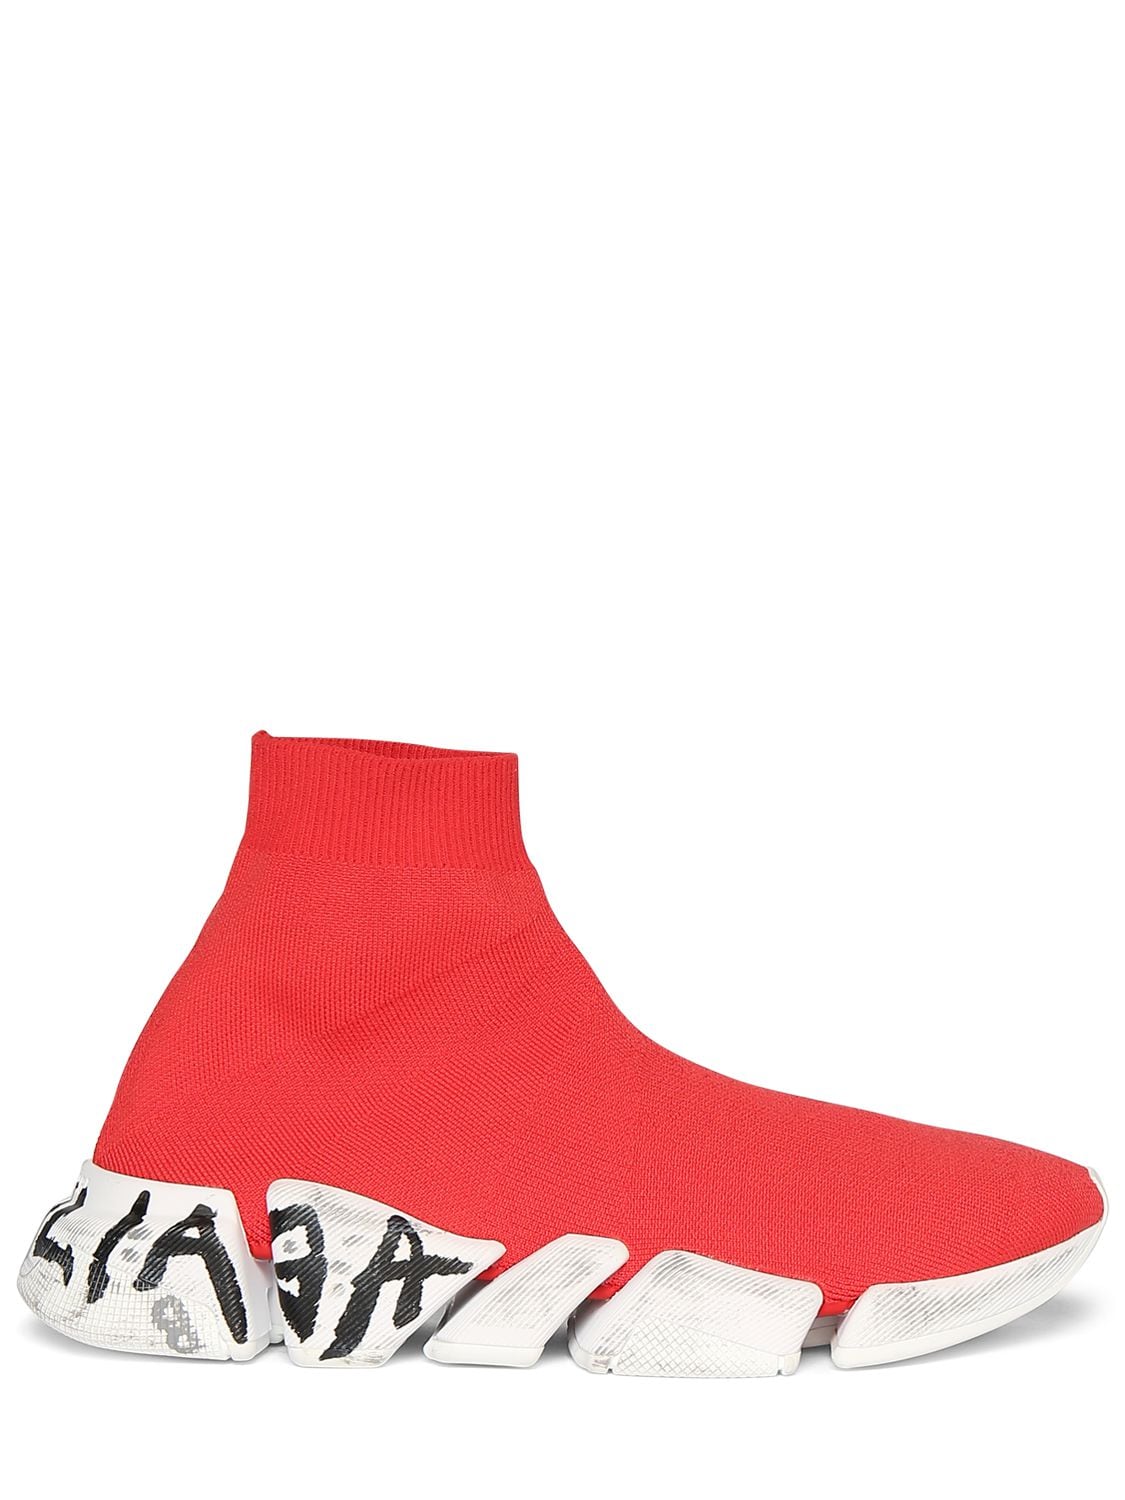 Balenciaga Speed 2.0 Sneakers In Toma Red Whi Grf Bla